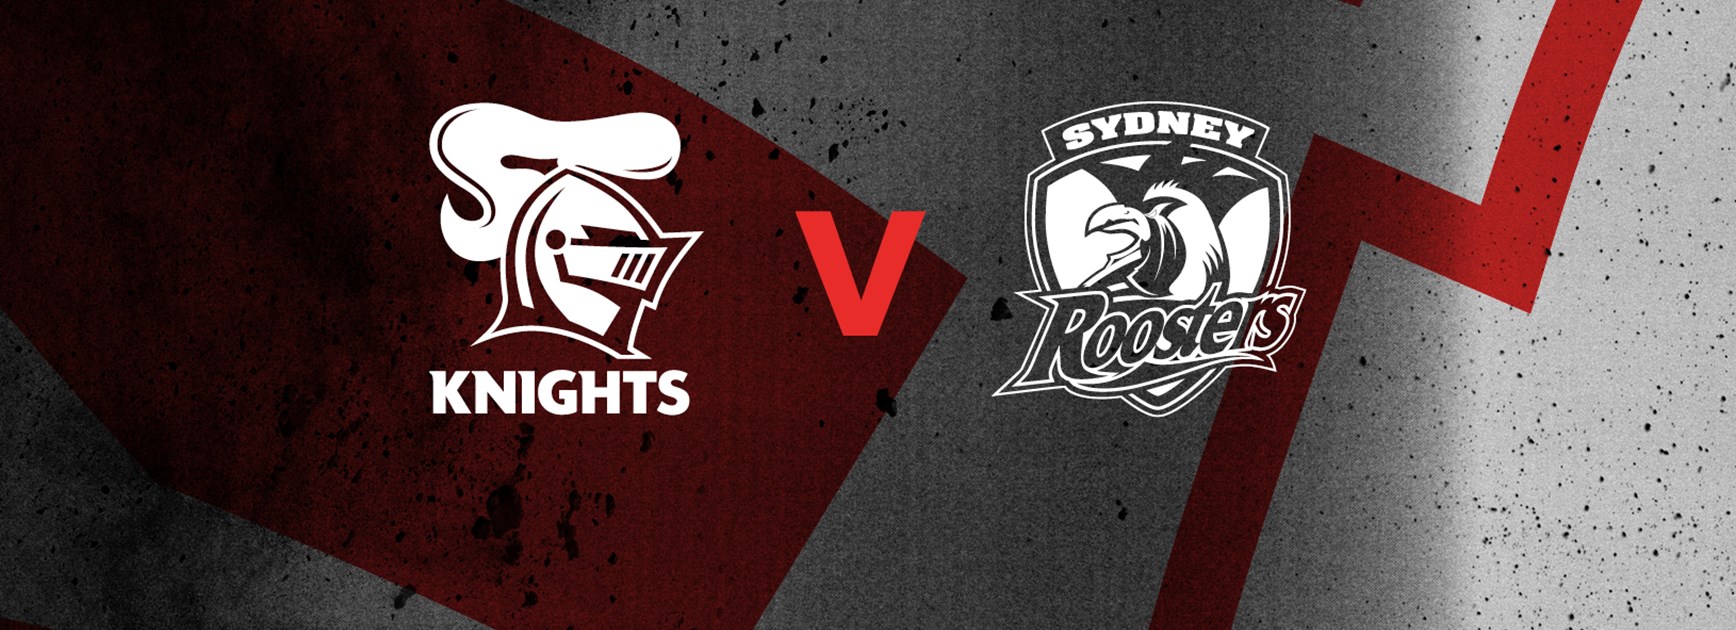 Knights v Roosters Gosford NRL trial team